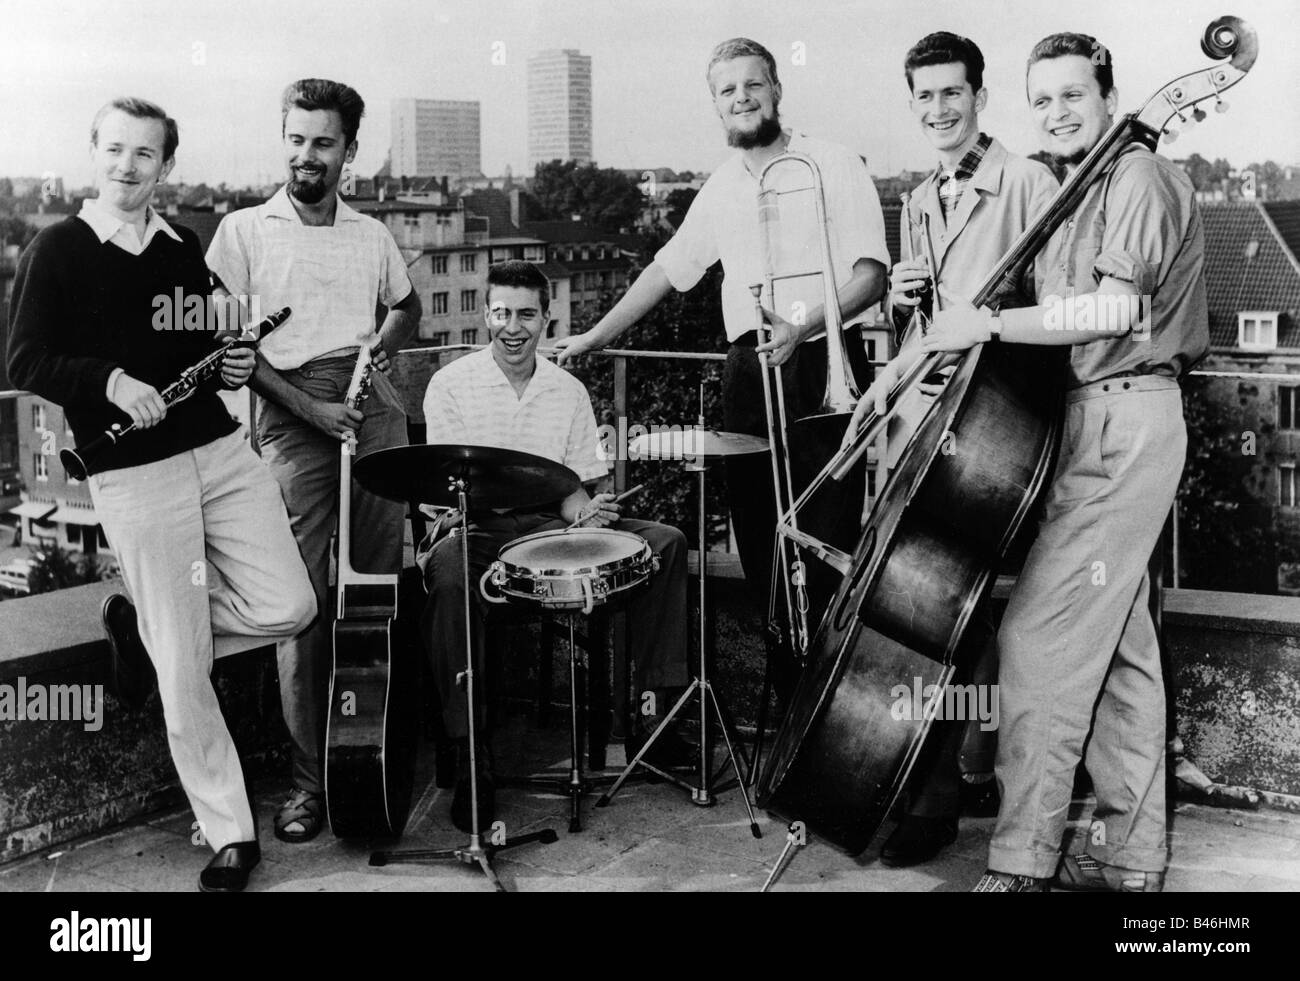 Doldinger, Klaus, * 12.5.1936, German musician (jazz), composer,full length, with music band Feetwarmers Dixieland, group picture, 1960s, Stock Photo